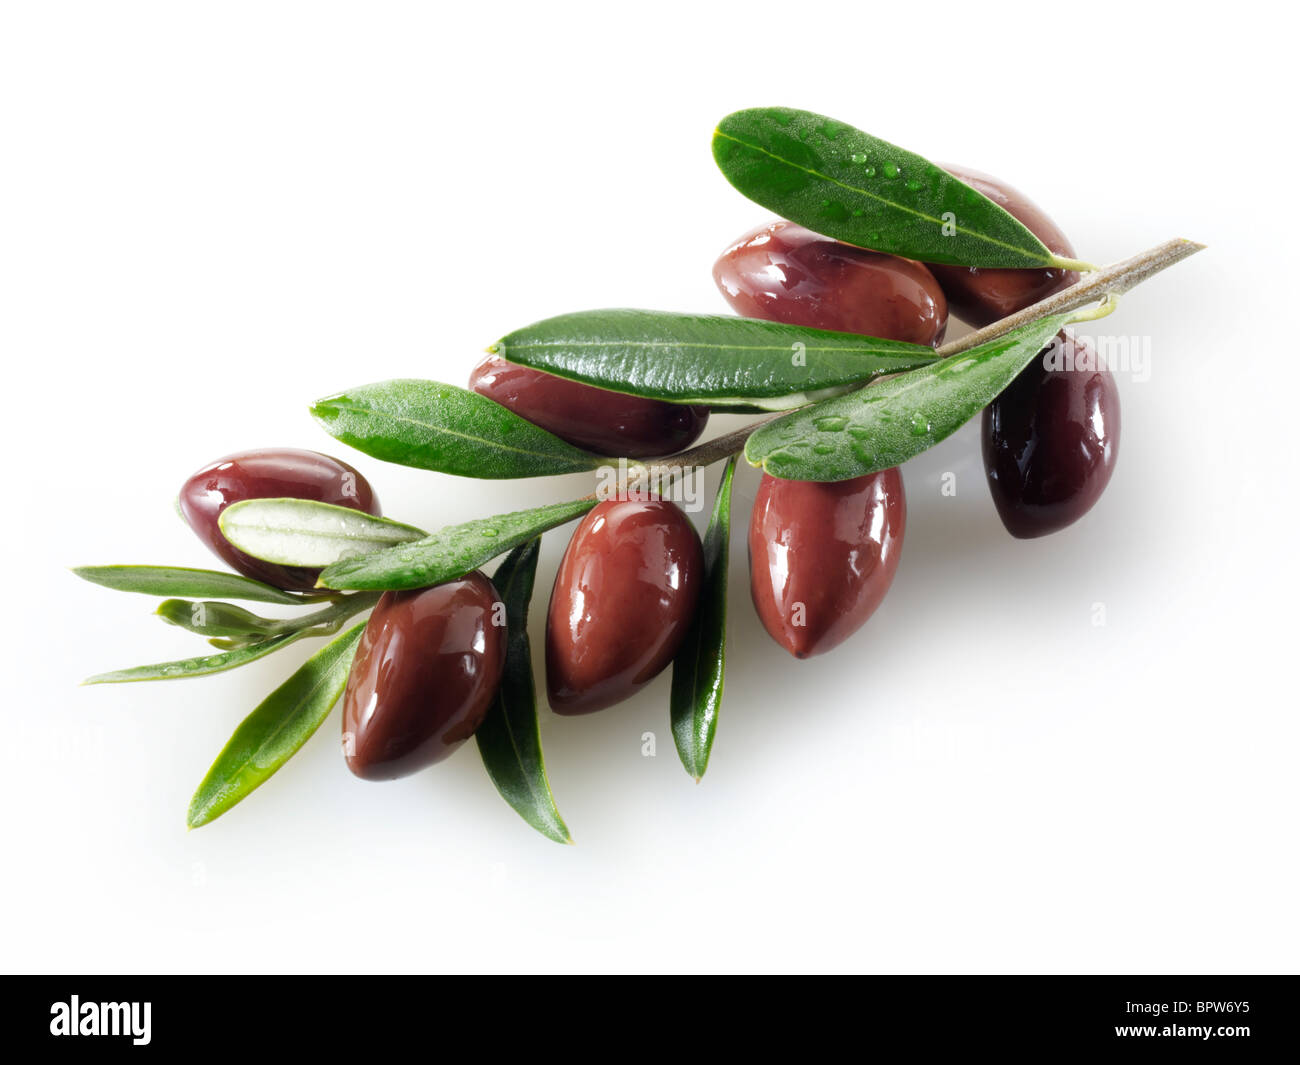 Fresh kalamata olives on an olive sprig photos, pictures & images. Cut out against white background Stock Photo